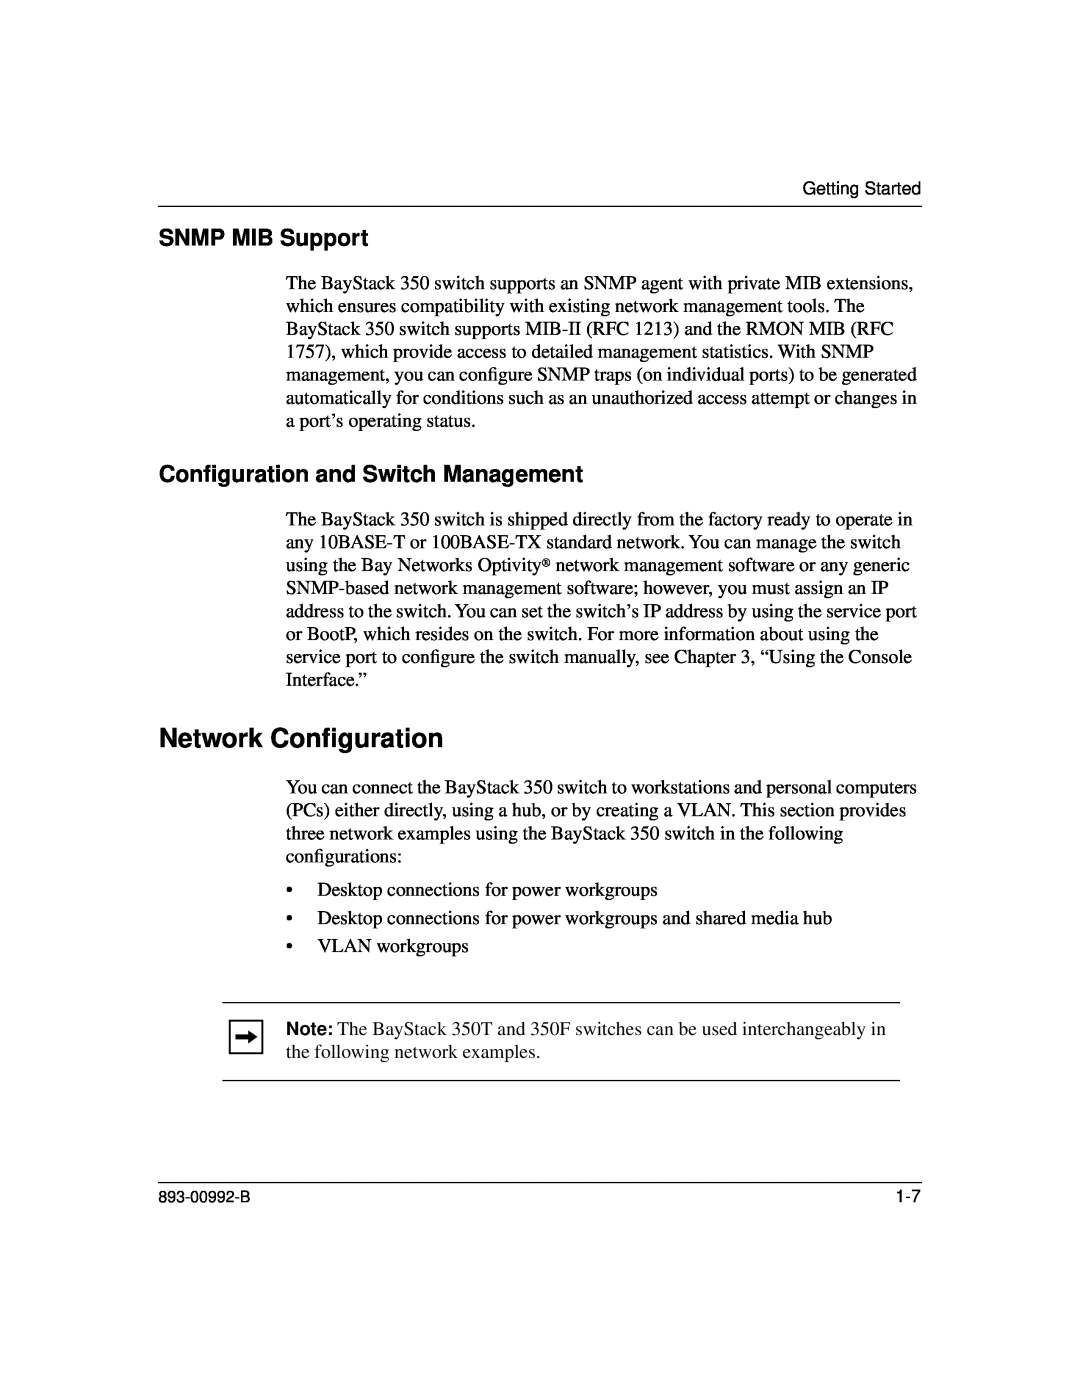 Bay Technical Associates 350 manual Network Conﬁguration, SNMP MIB Support, Conﬁguration and Switch Management 